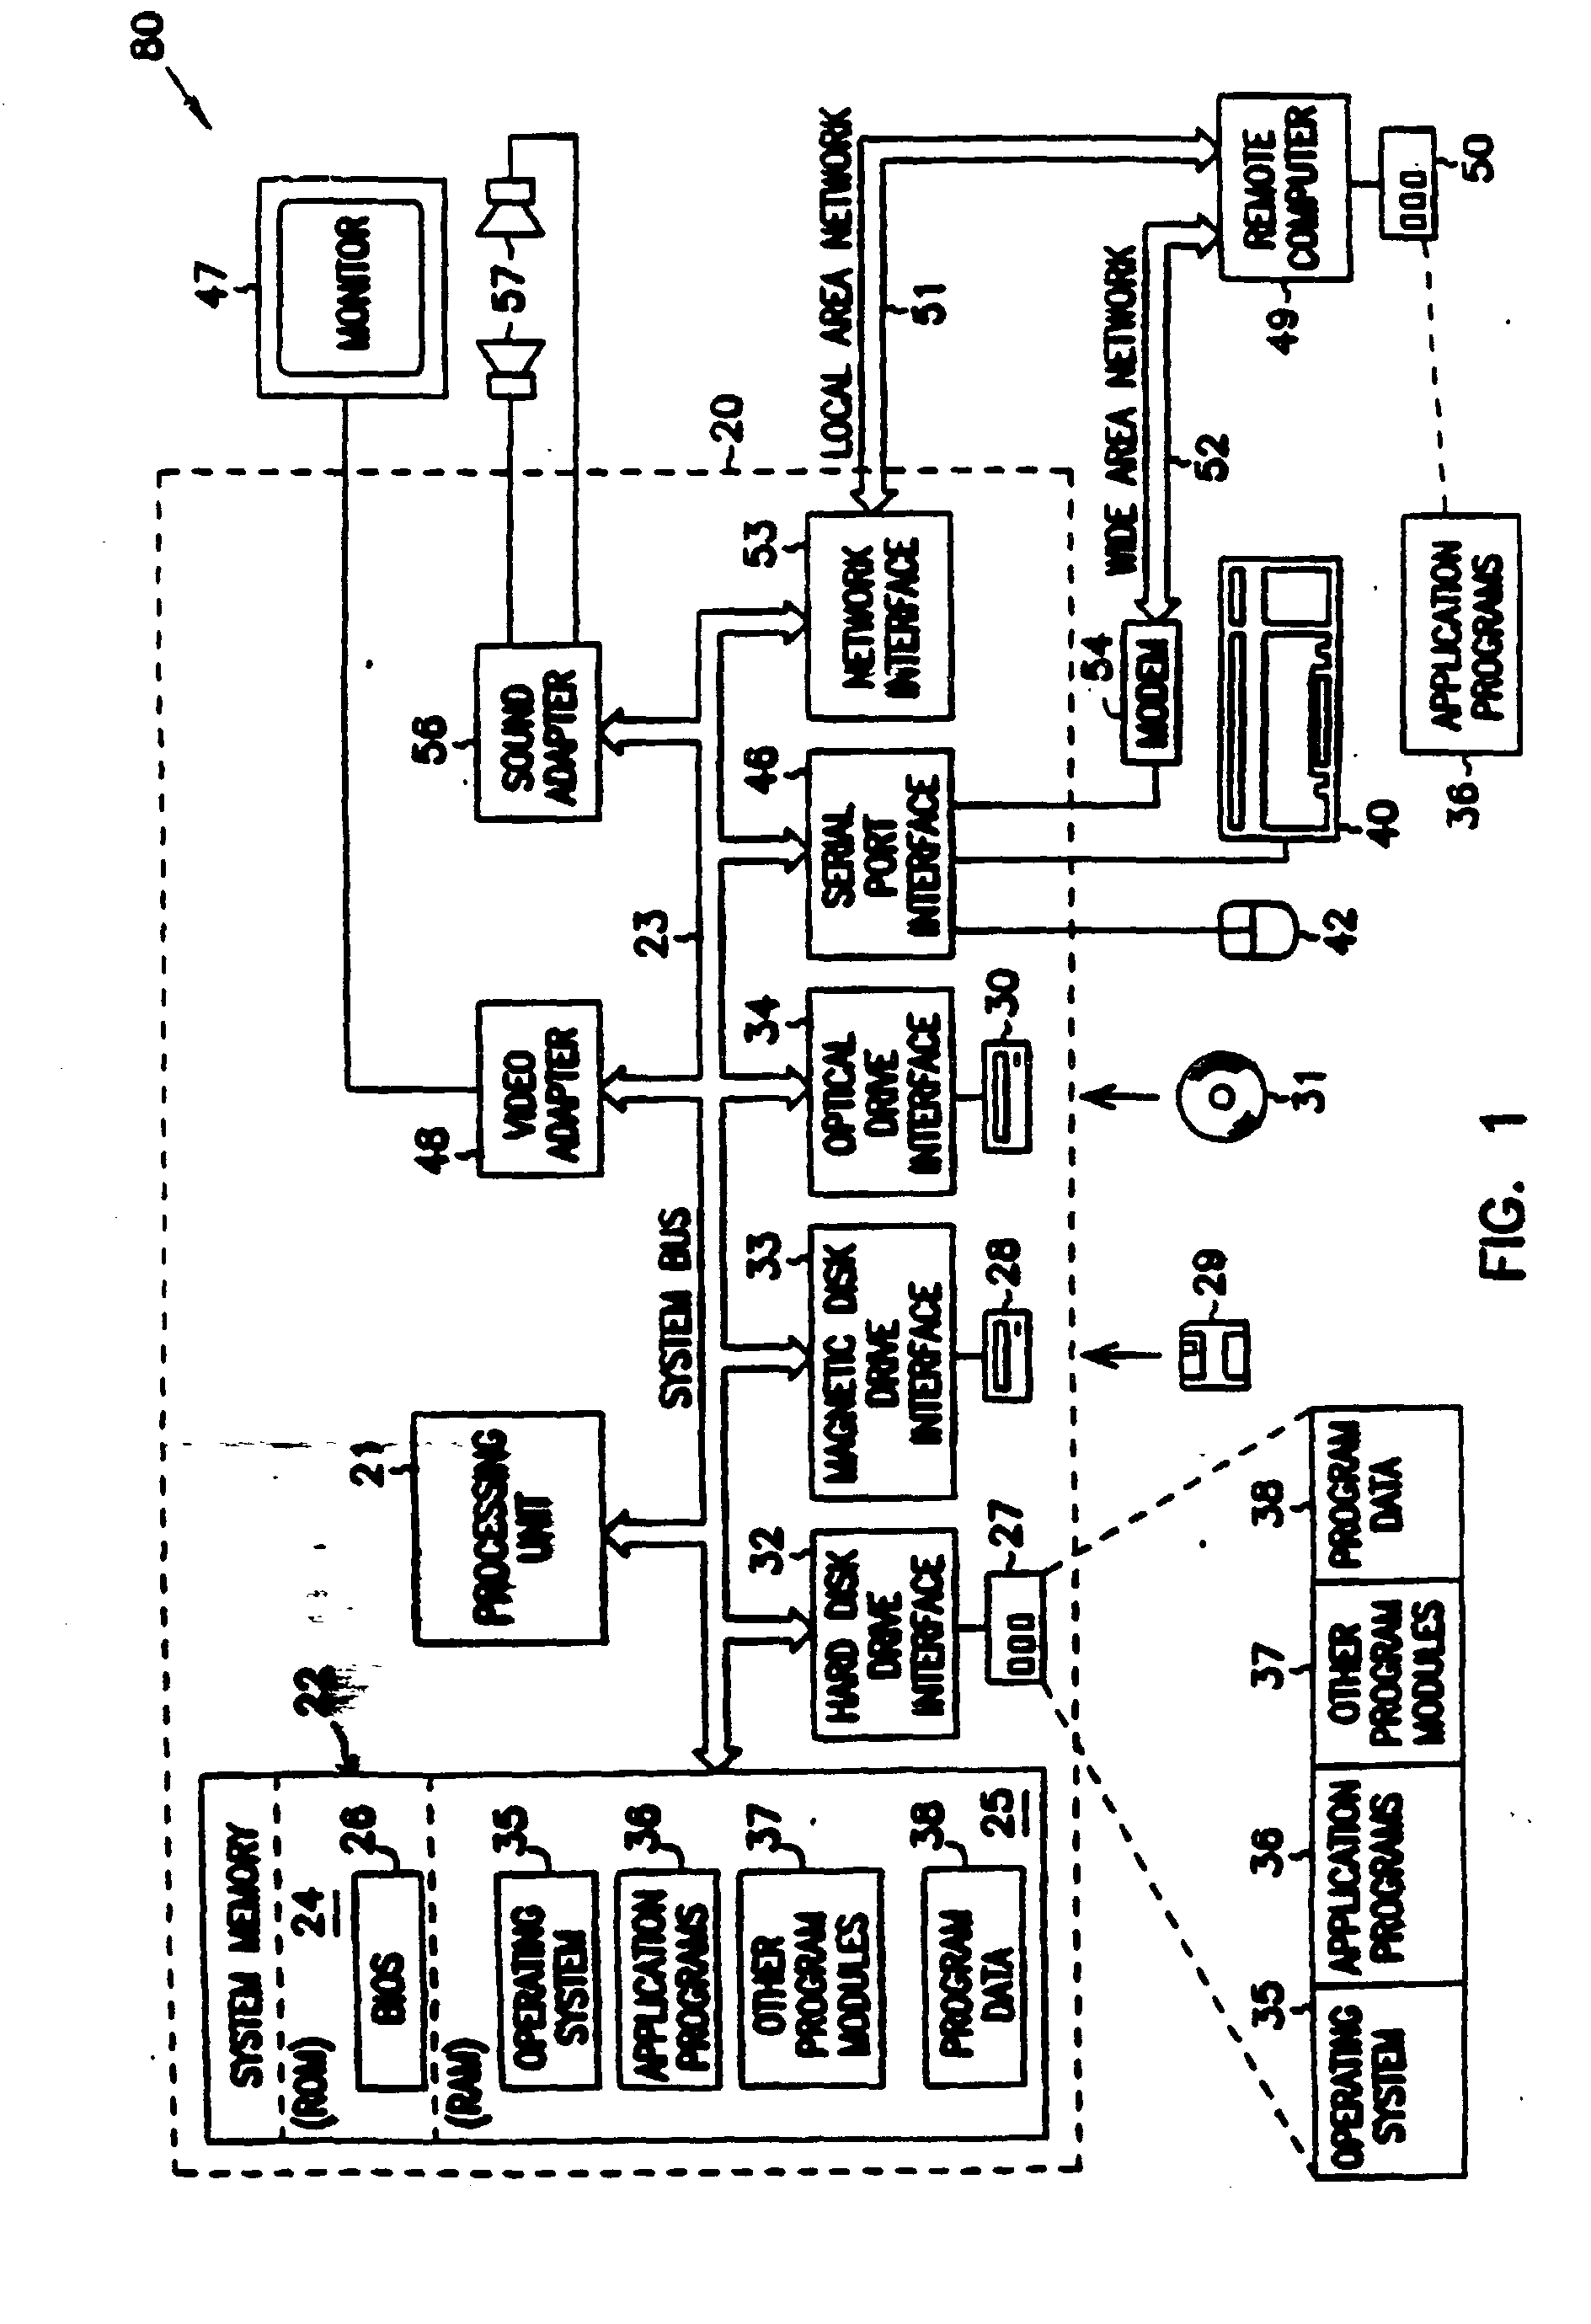 Method and apparatus for analyzing performance of data processing system